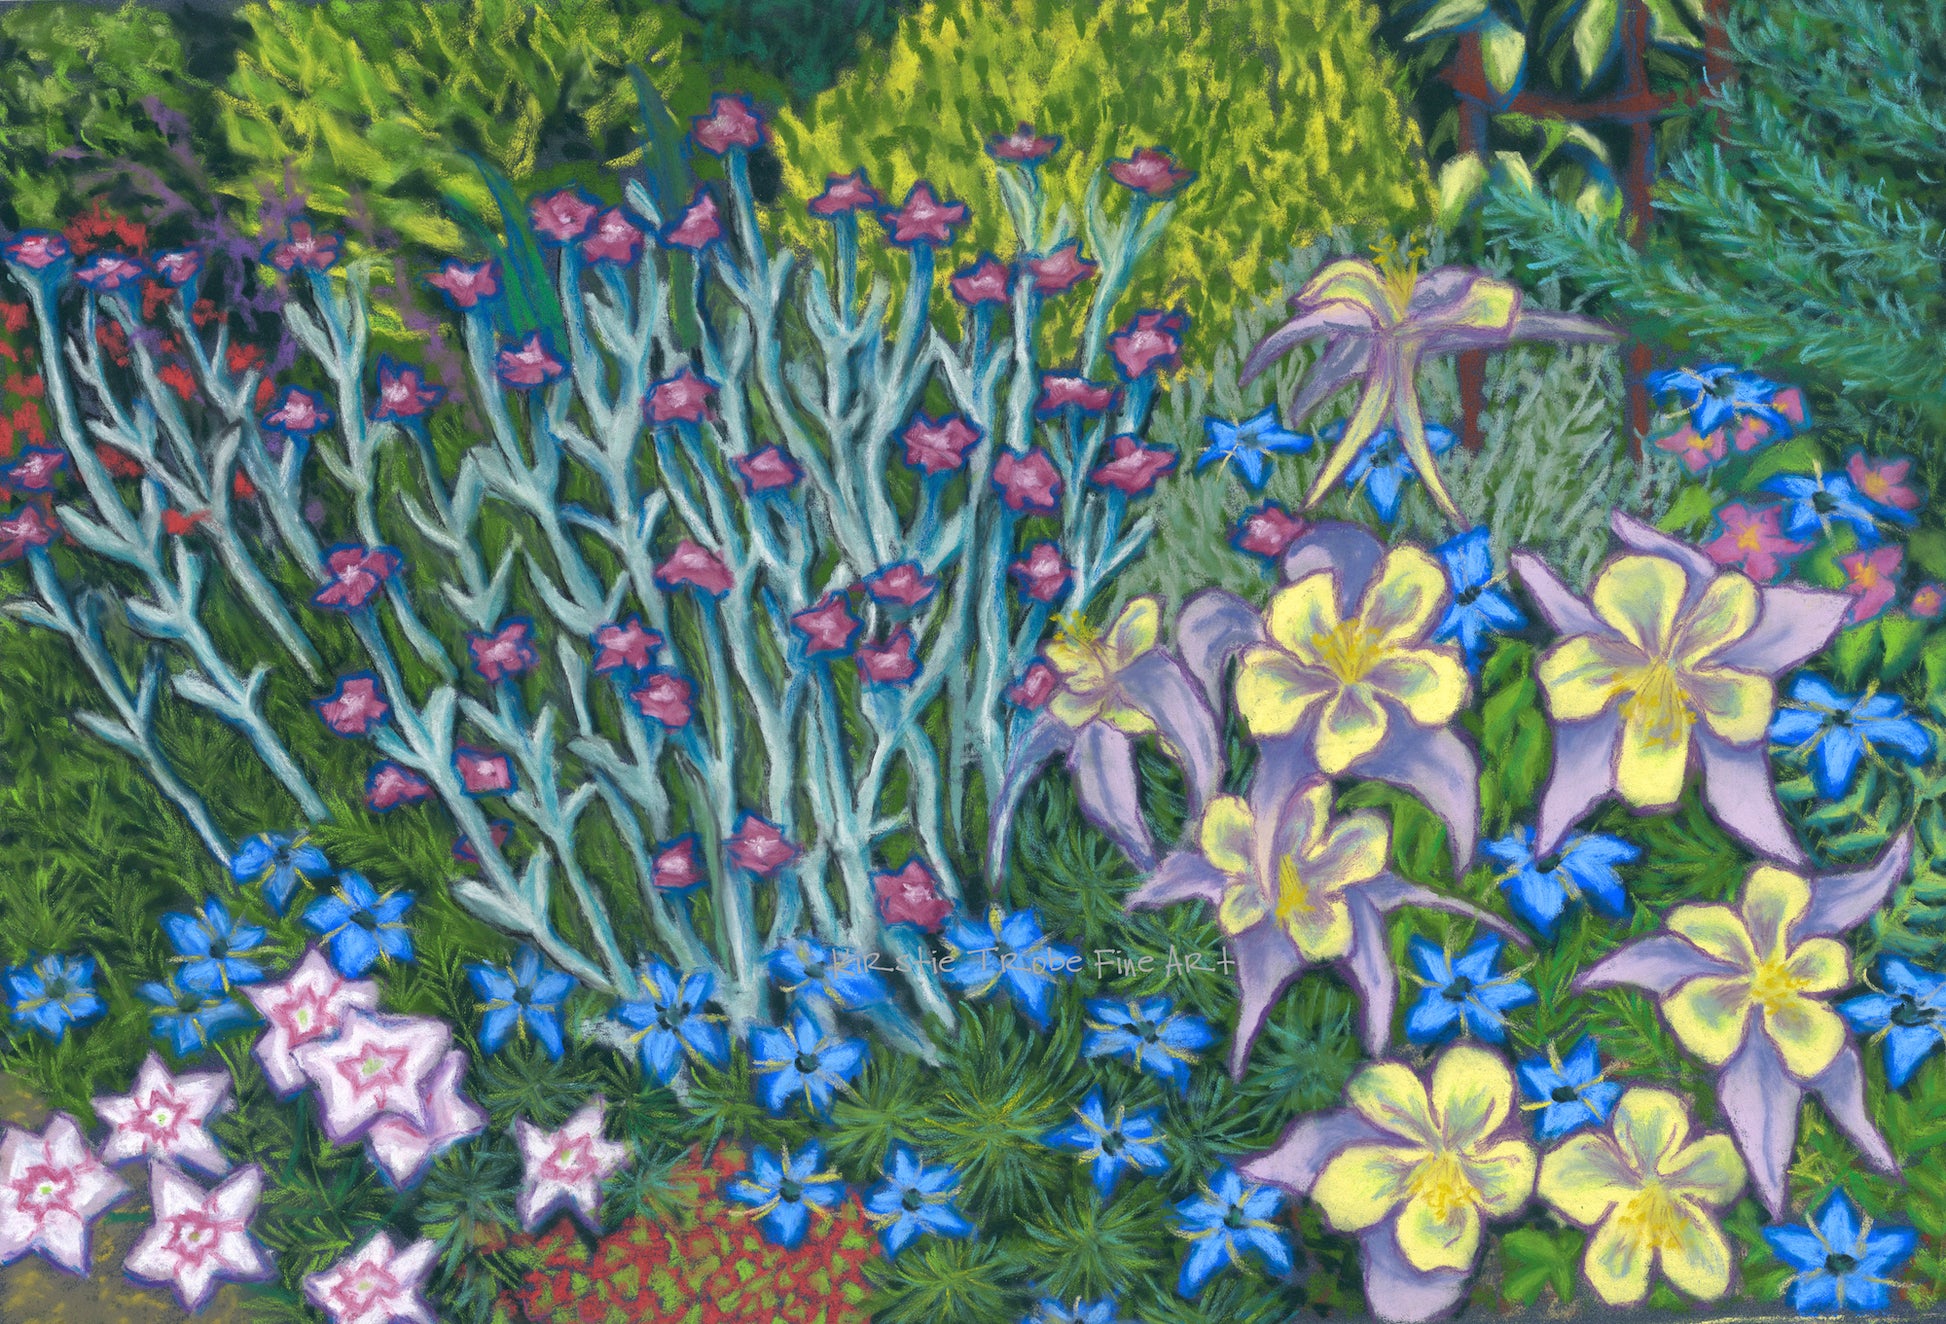 A riot of colourful Springtime flowers are depicted in bold vibrant hues in an English garden border. The pinks, blues and yellows of the petals pop out from the variety of greens in the foliage in the magical mystery garden.